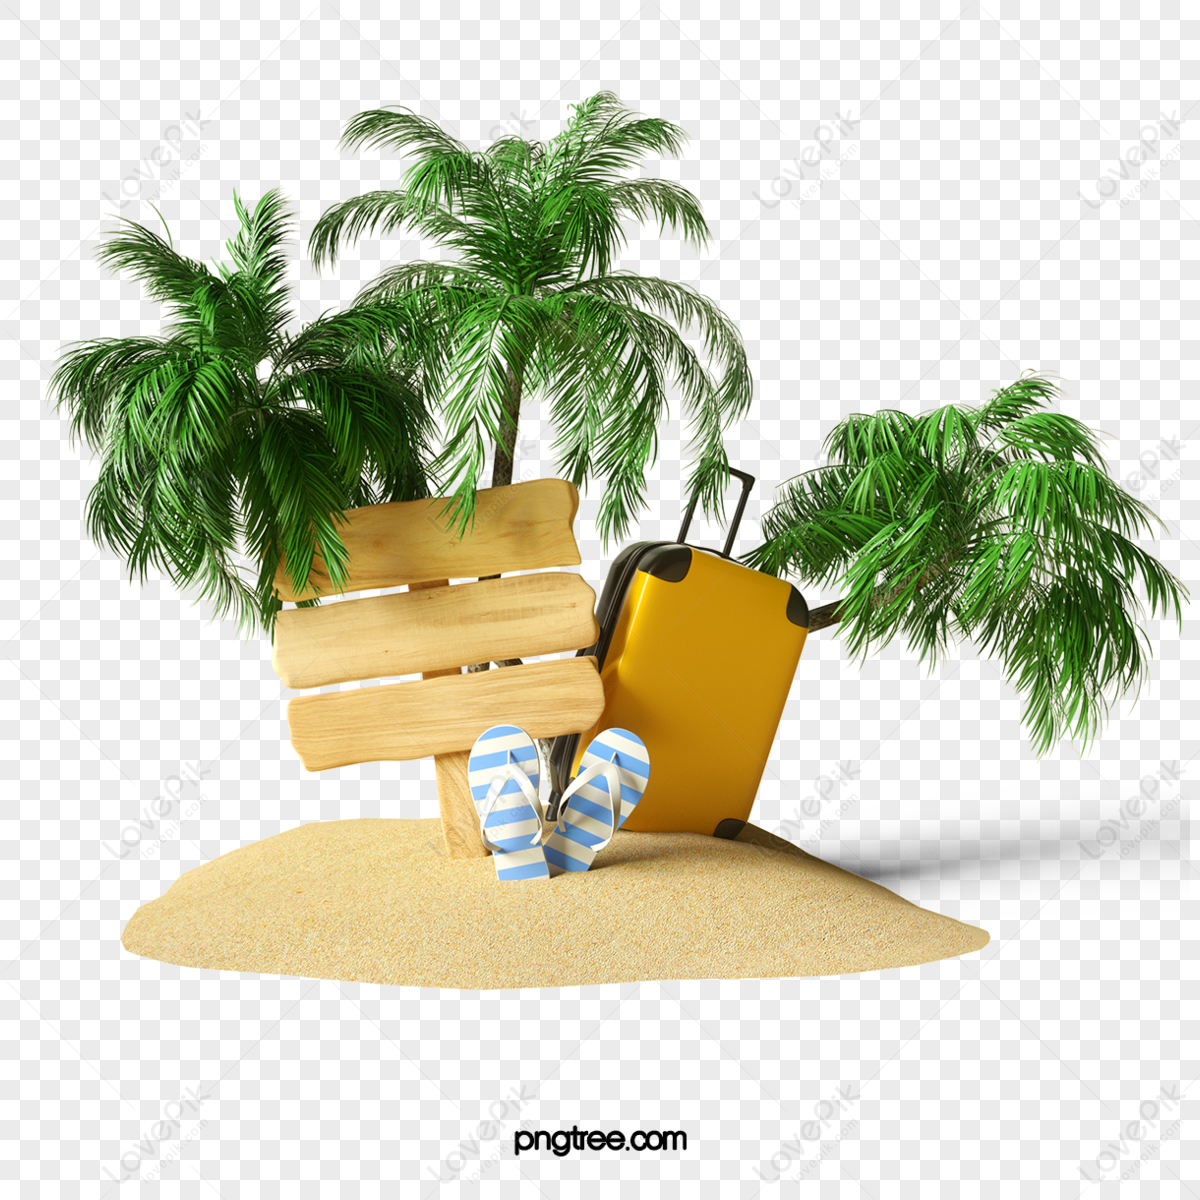 beach slippers travel 3d elements,greenery,yellow,indicator png hd transparent image